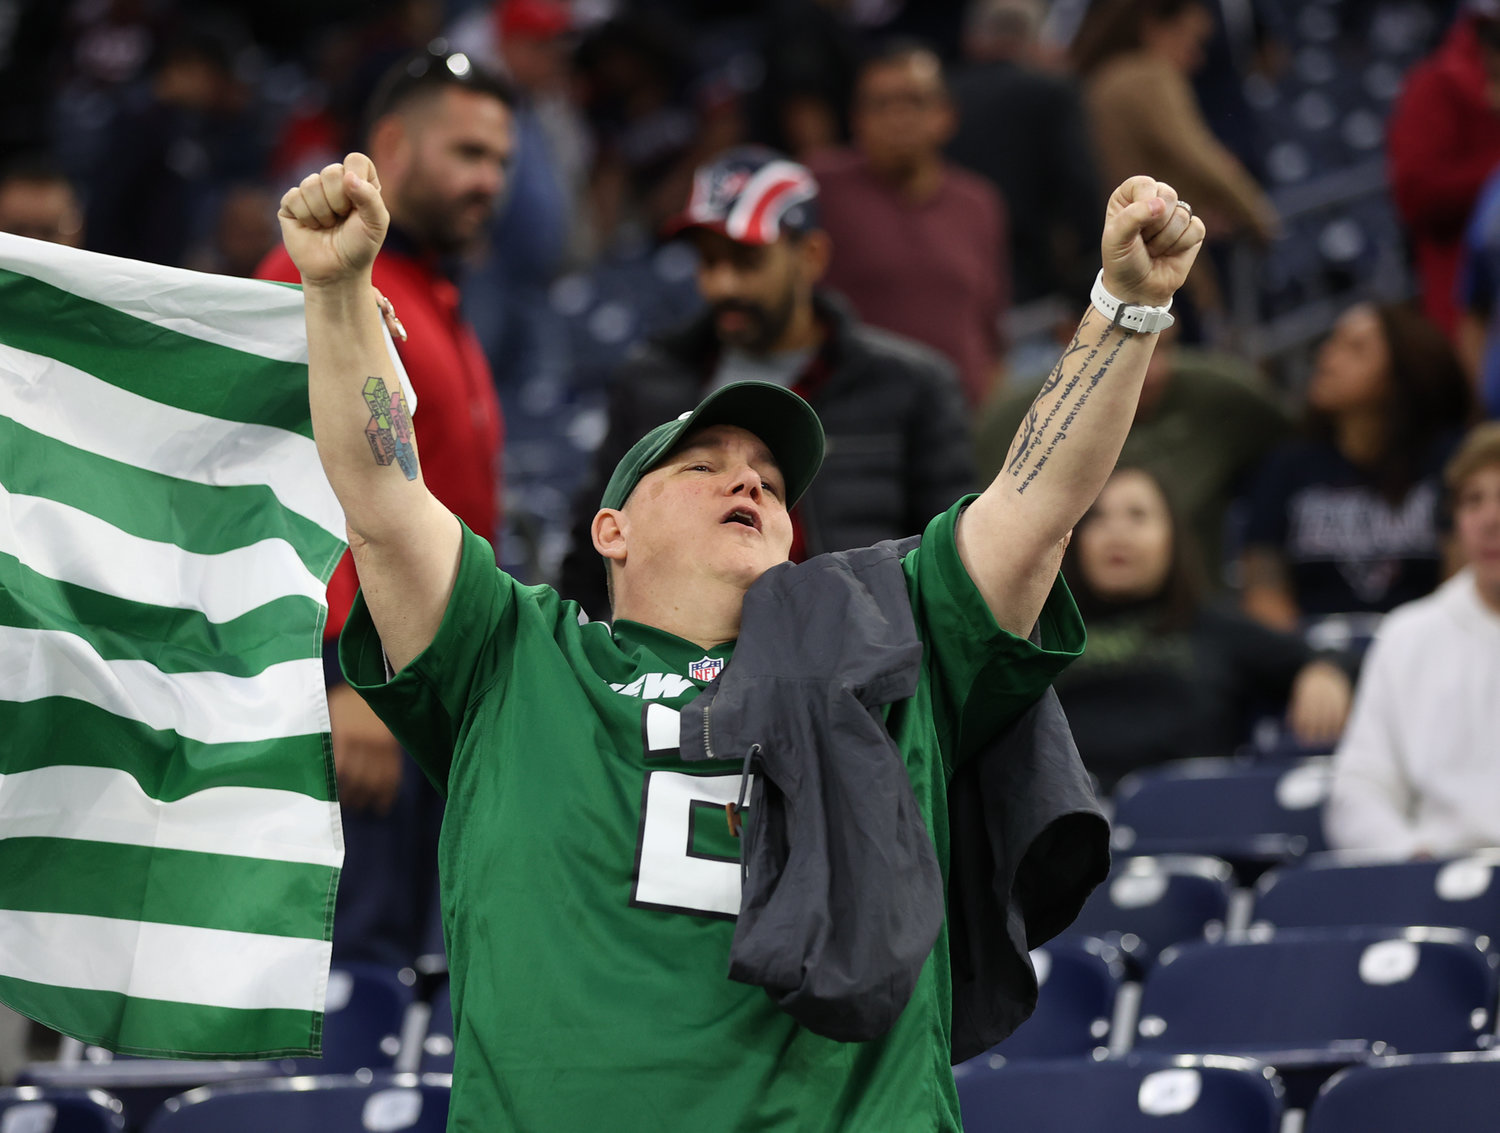 A New York Jets fan celebrates a 21-14 win over the Texans on November 28, 2021 in Houston, Texas.